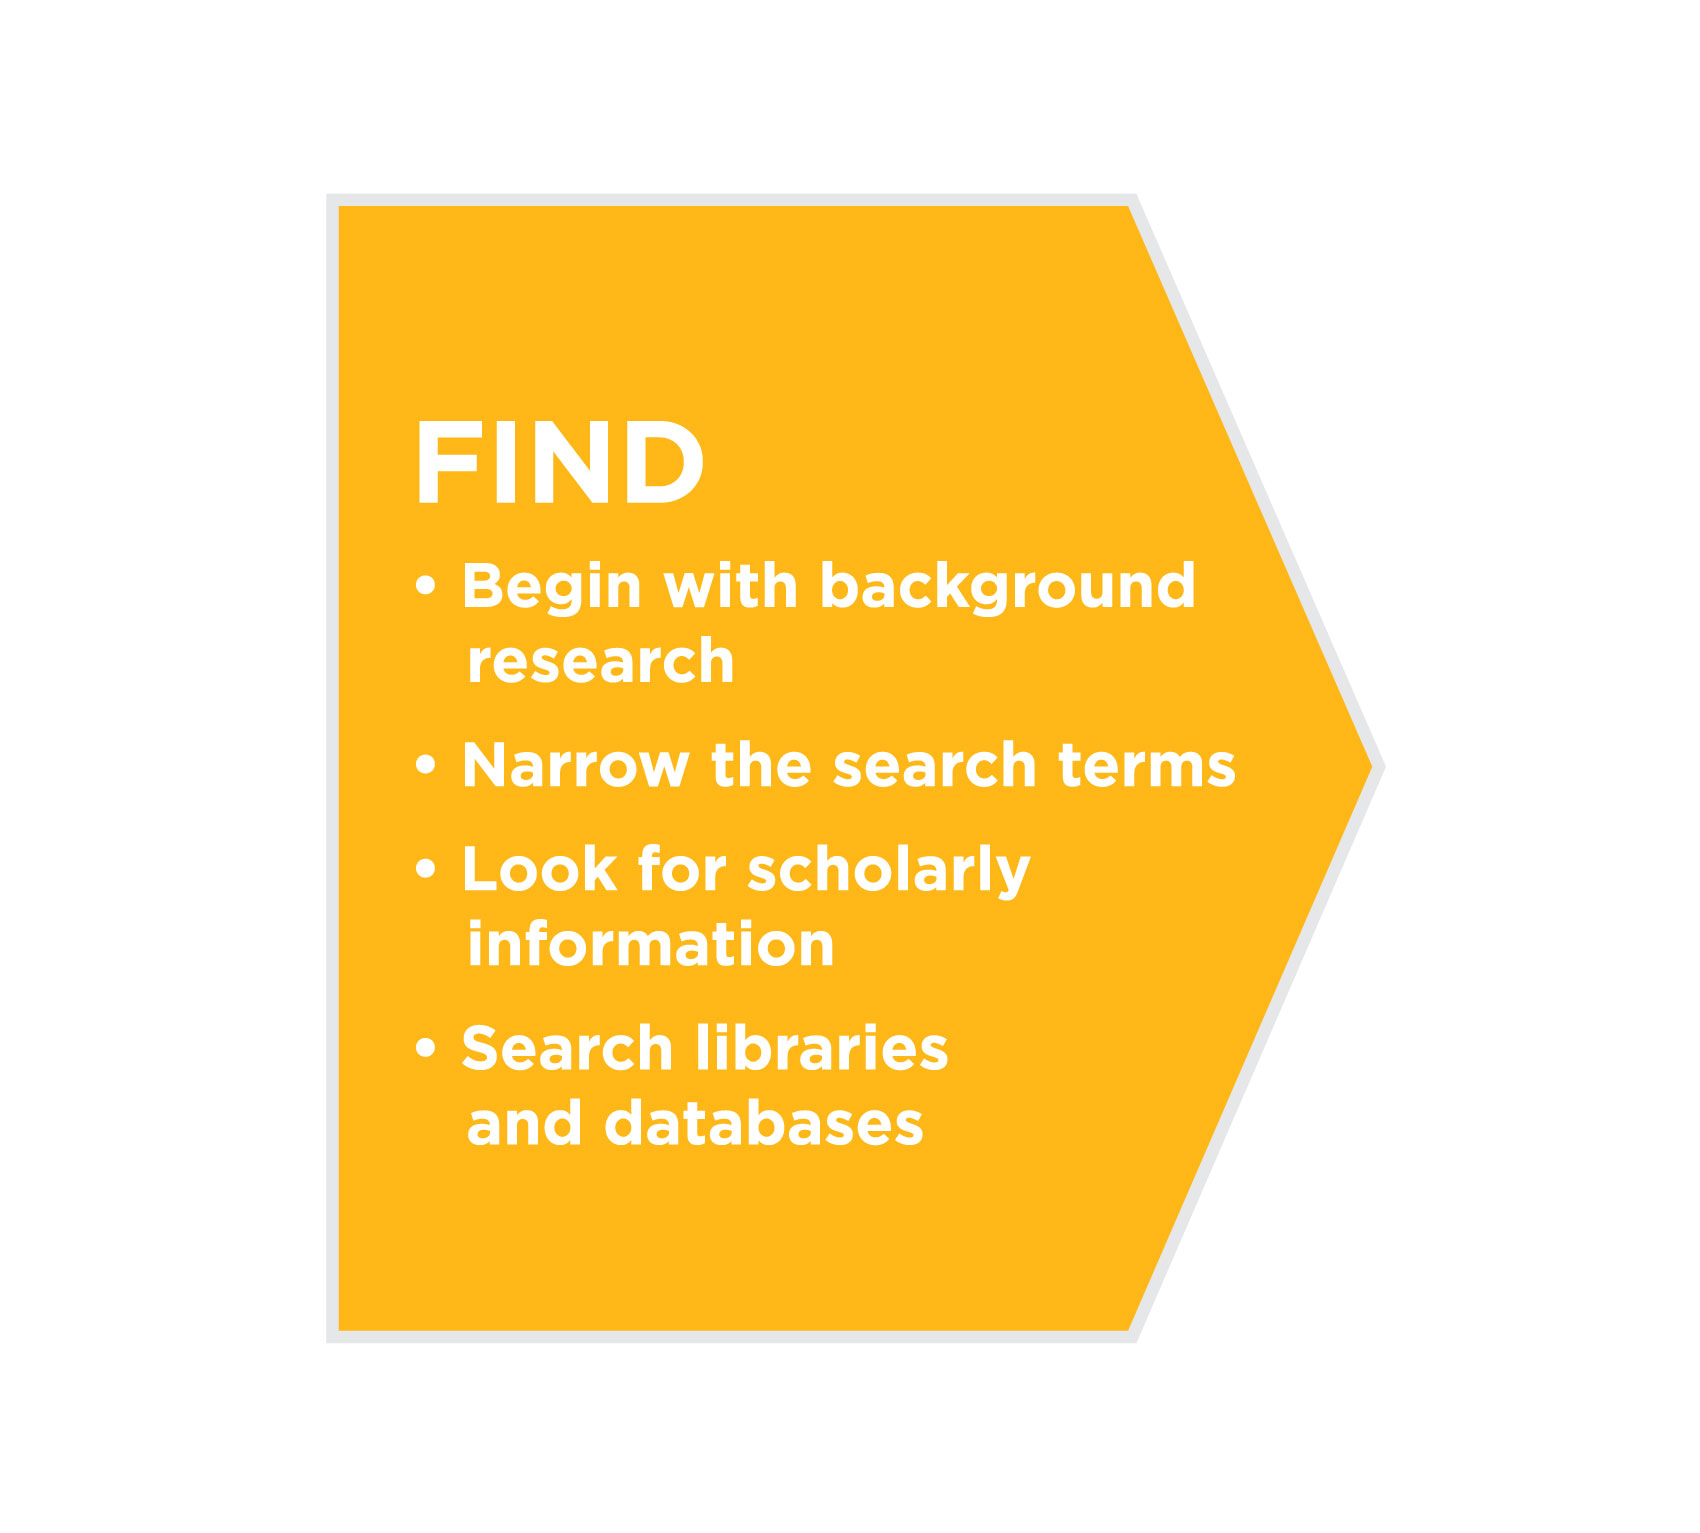 Tips for finding sources: begin with background research, narrow the search terms, look for scholarly information, search libraries and databases.